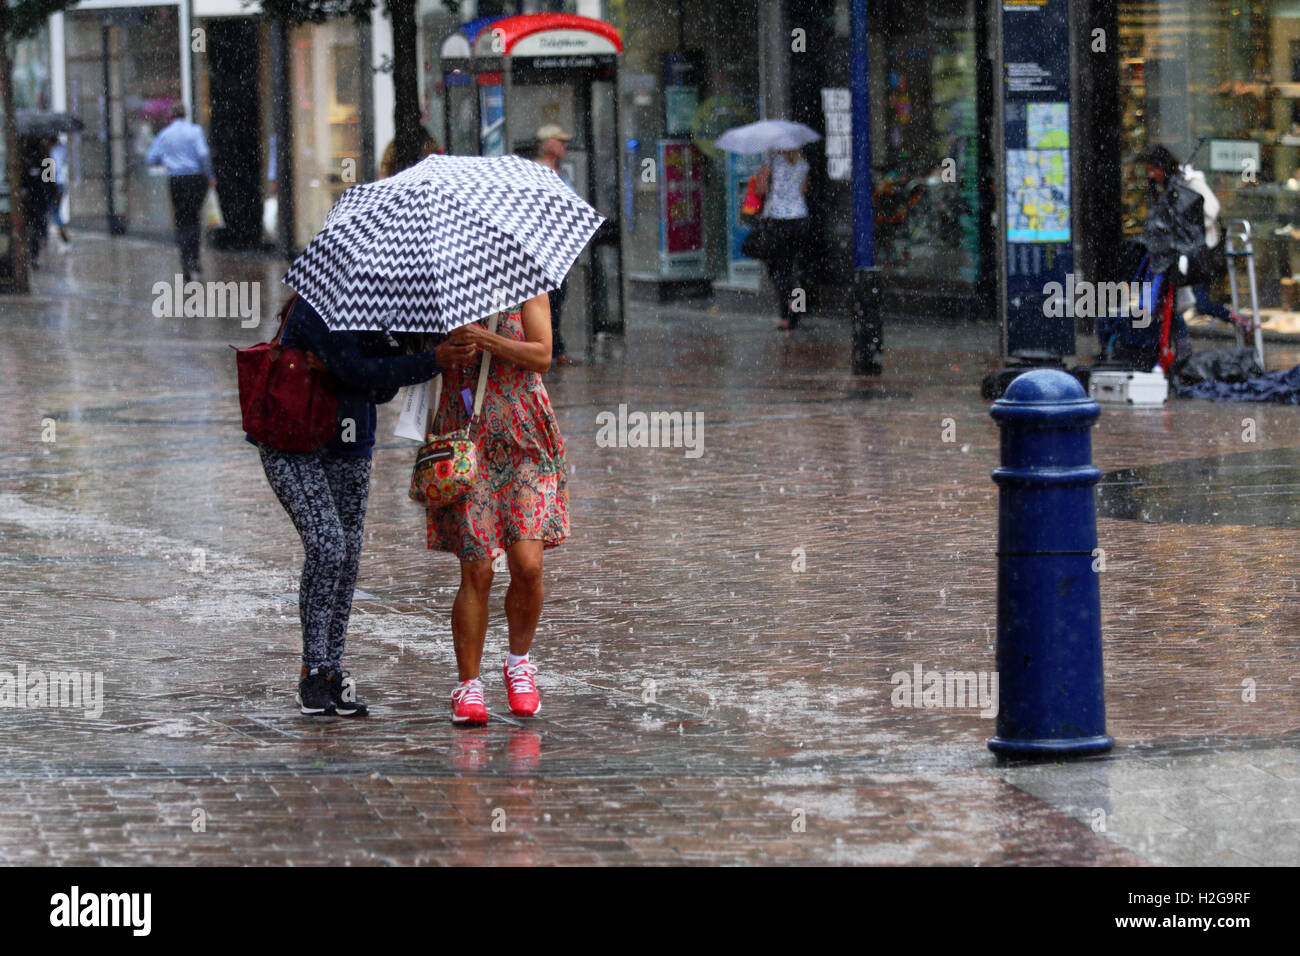 Two females caught in a sudden shower of rain try to stay dry under an umbrella in Kingston, Surrey, England. Stock Photo